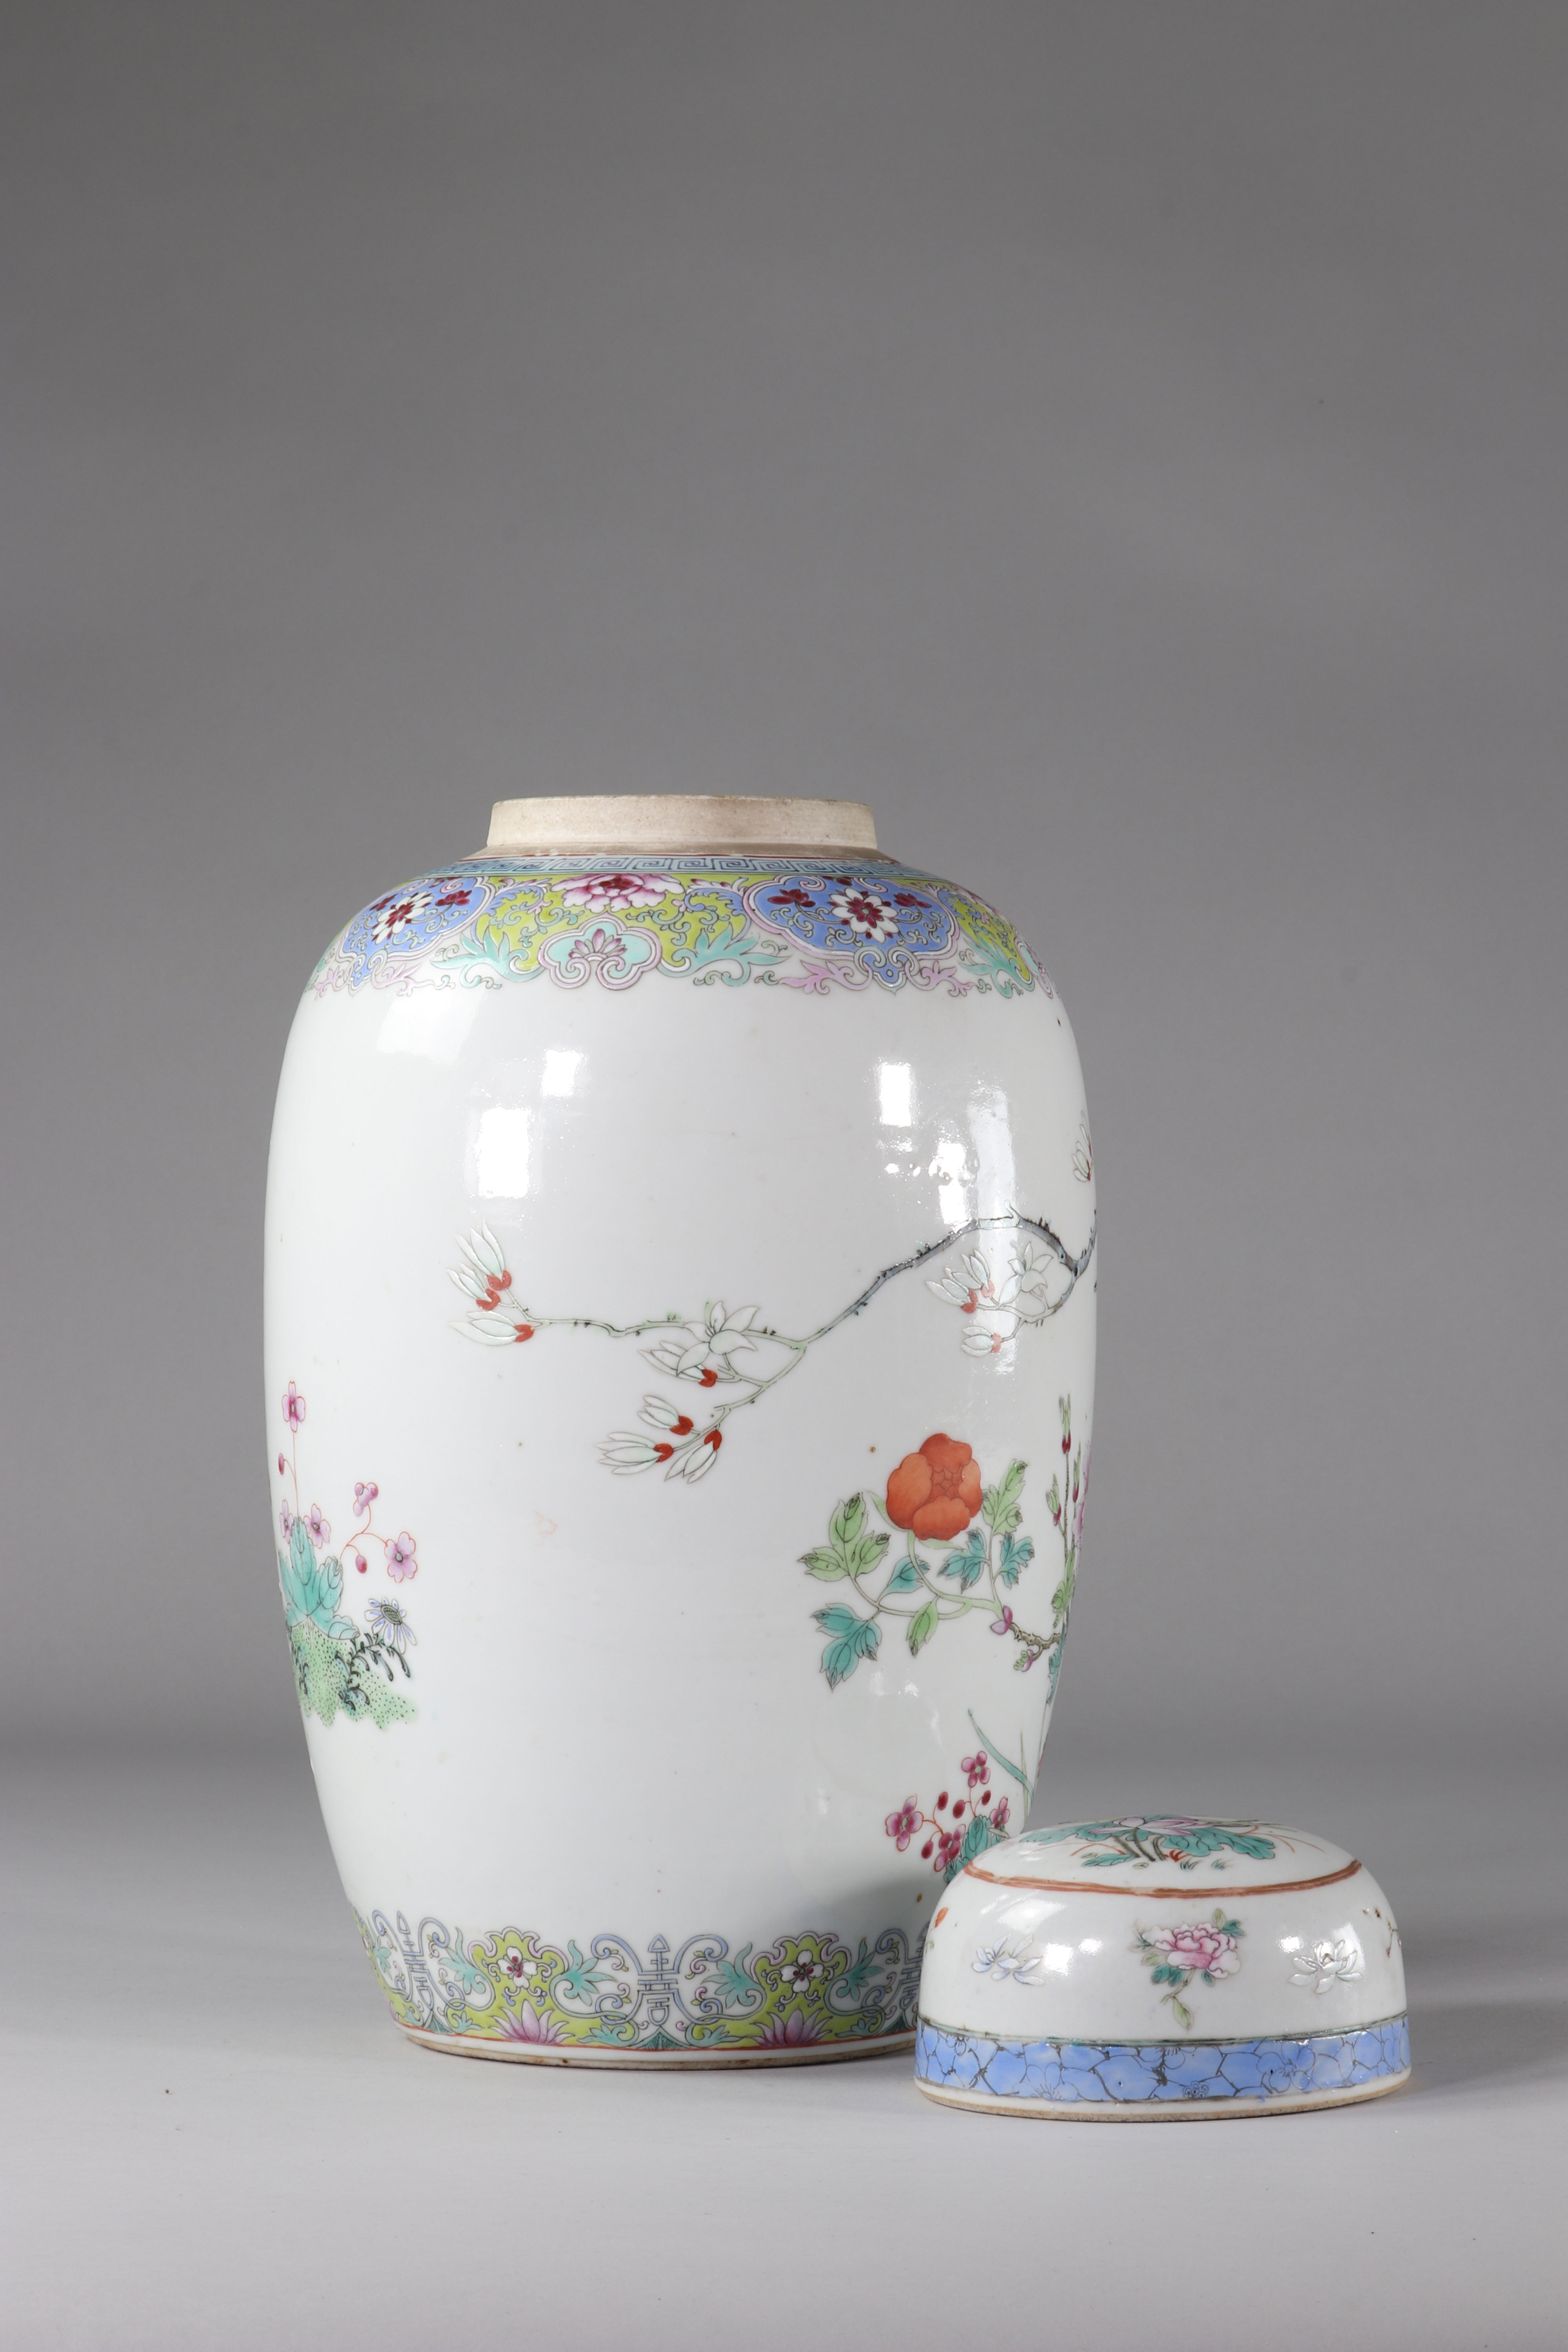 China famille rose porcelain vase decorated with birds and flowers Qing period - Image 5 of 7